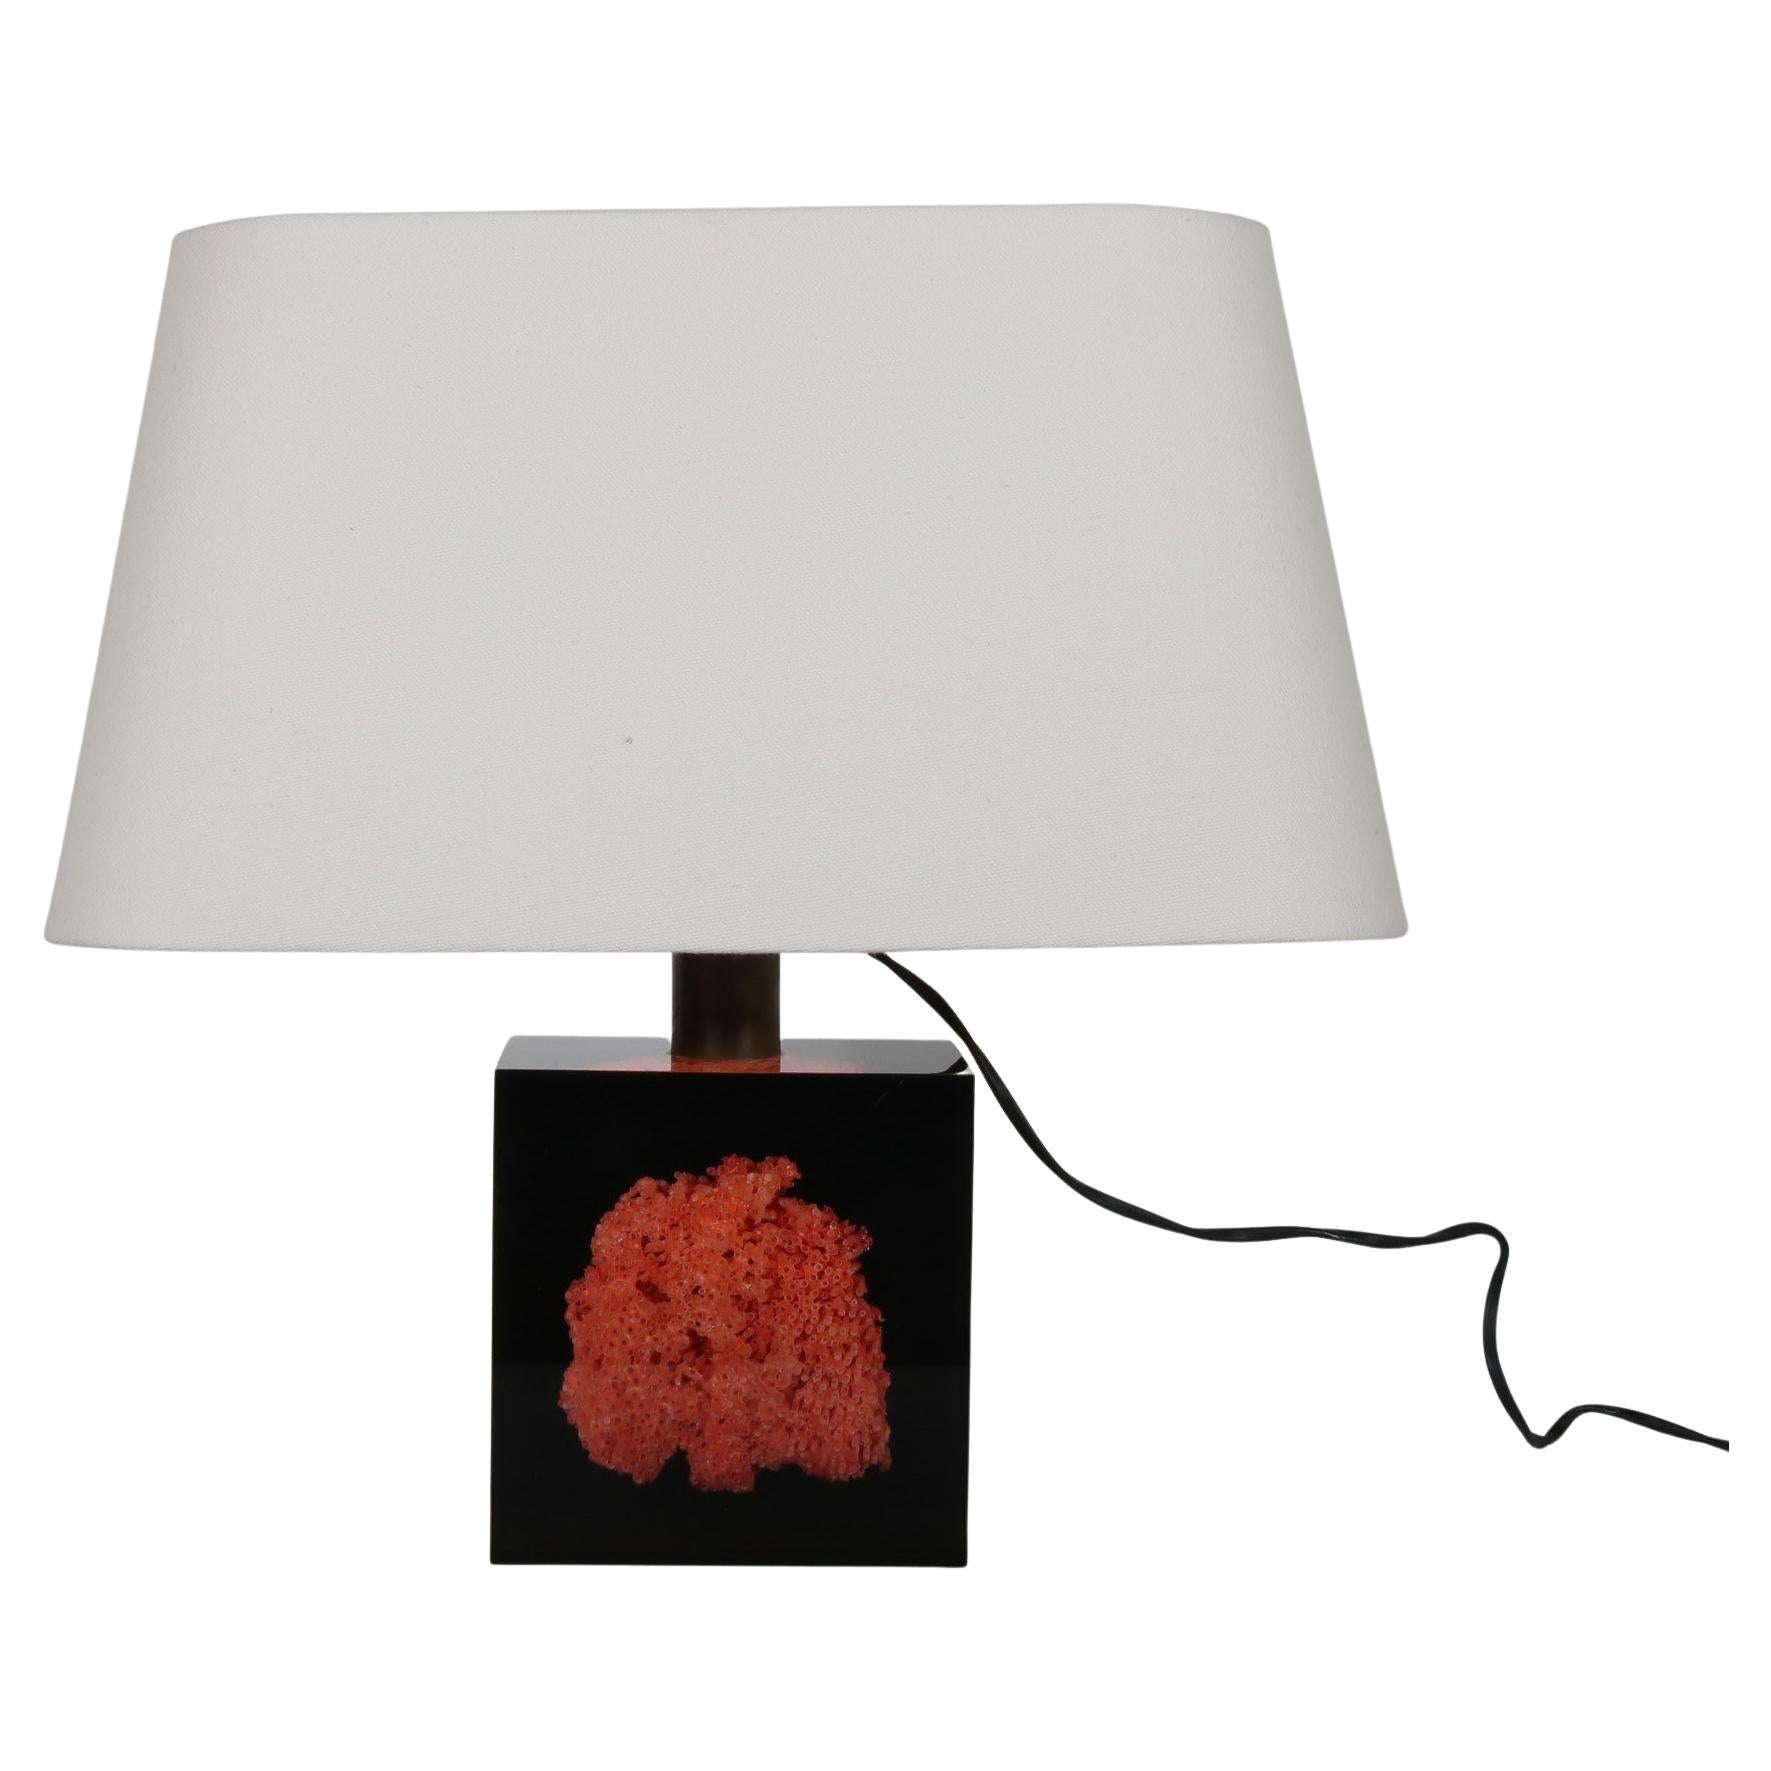 Pierre Giraudon Resin with Coral Table Lamp, France, 1970 For Sale